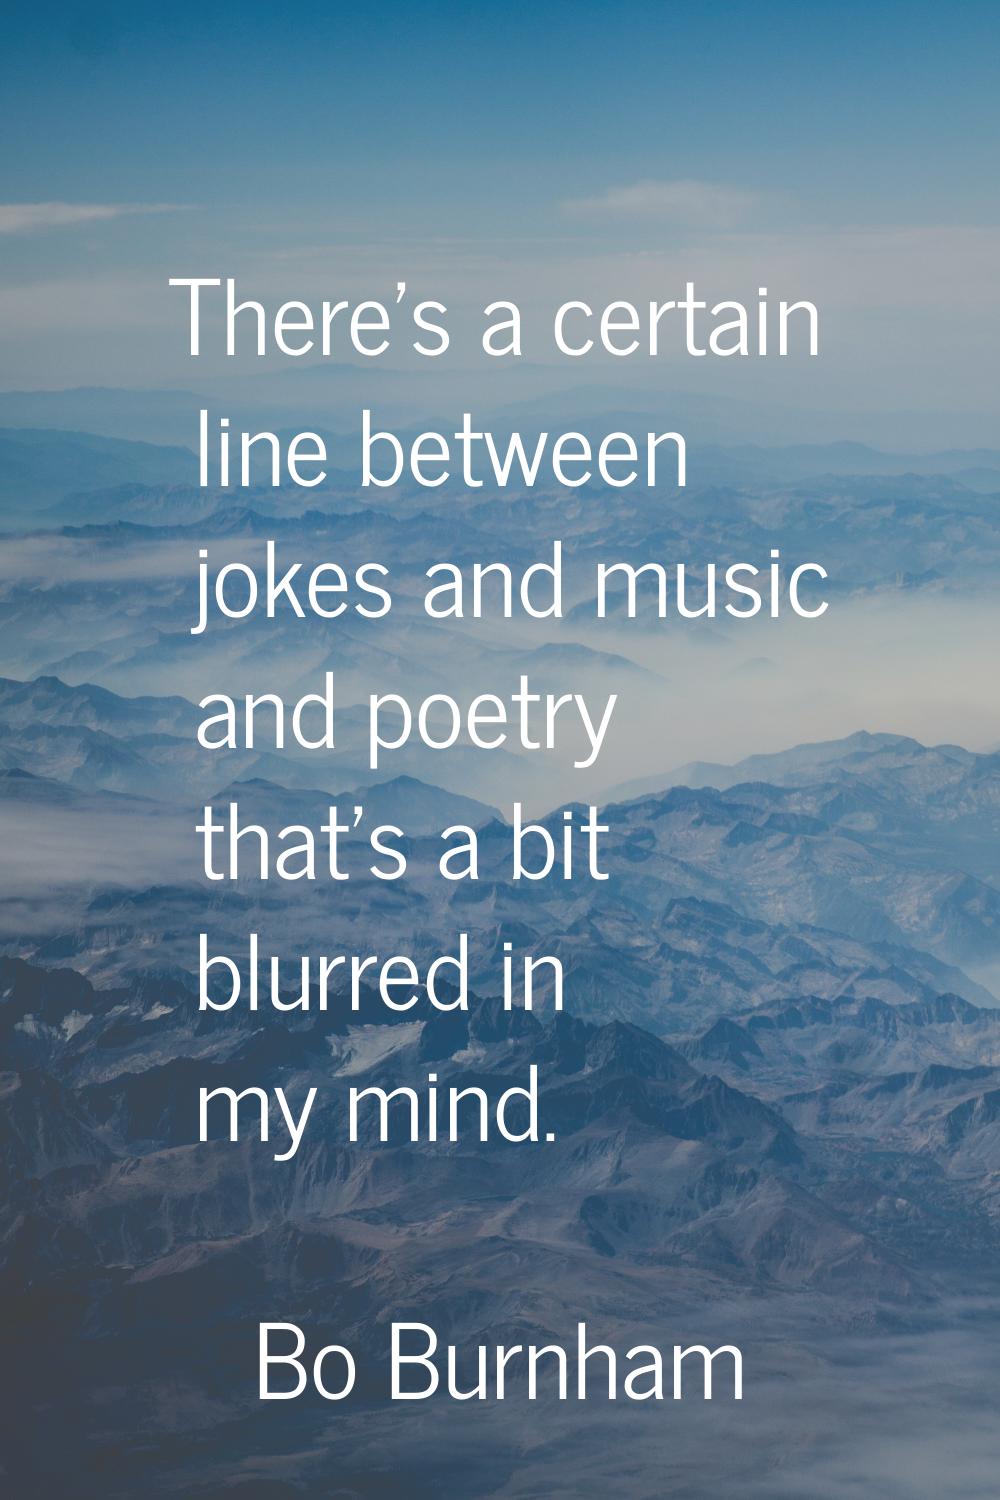 There's a certain line between jokes and music and poetry that's a bit blurred in my mind.